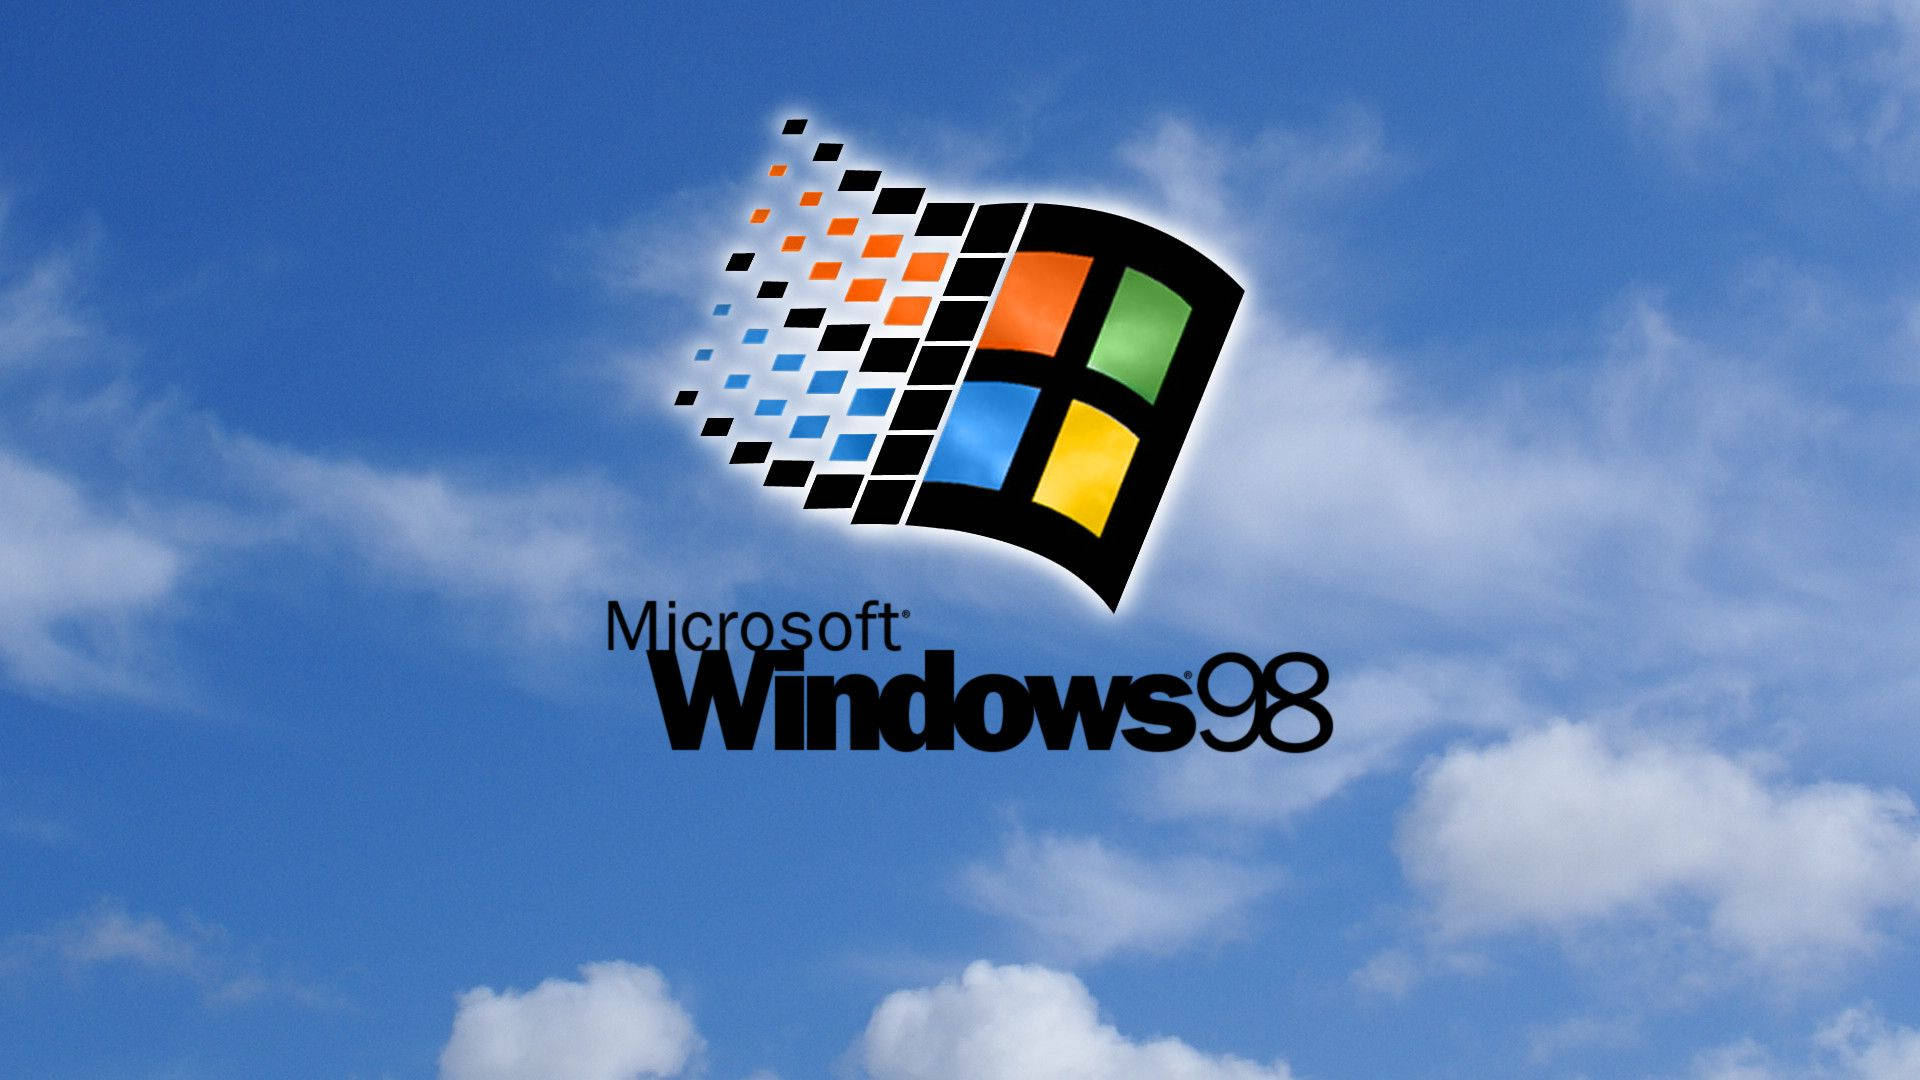 Windows 95 1920X1080 Wallpaper and Background Image